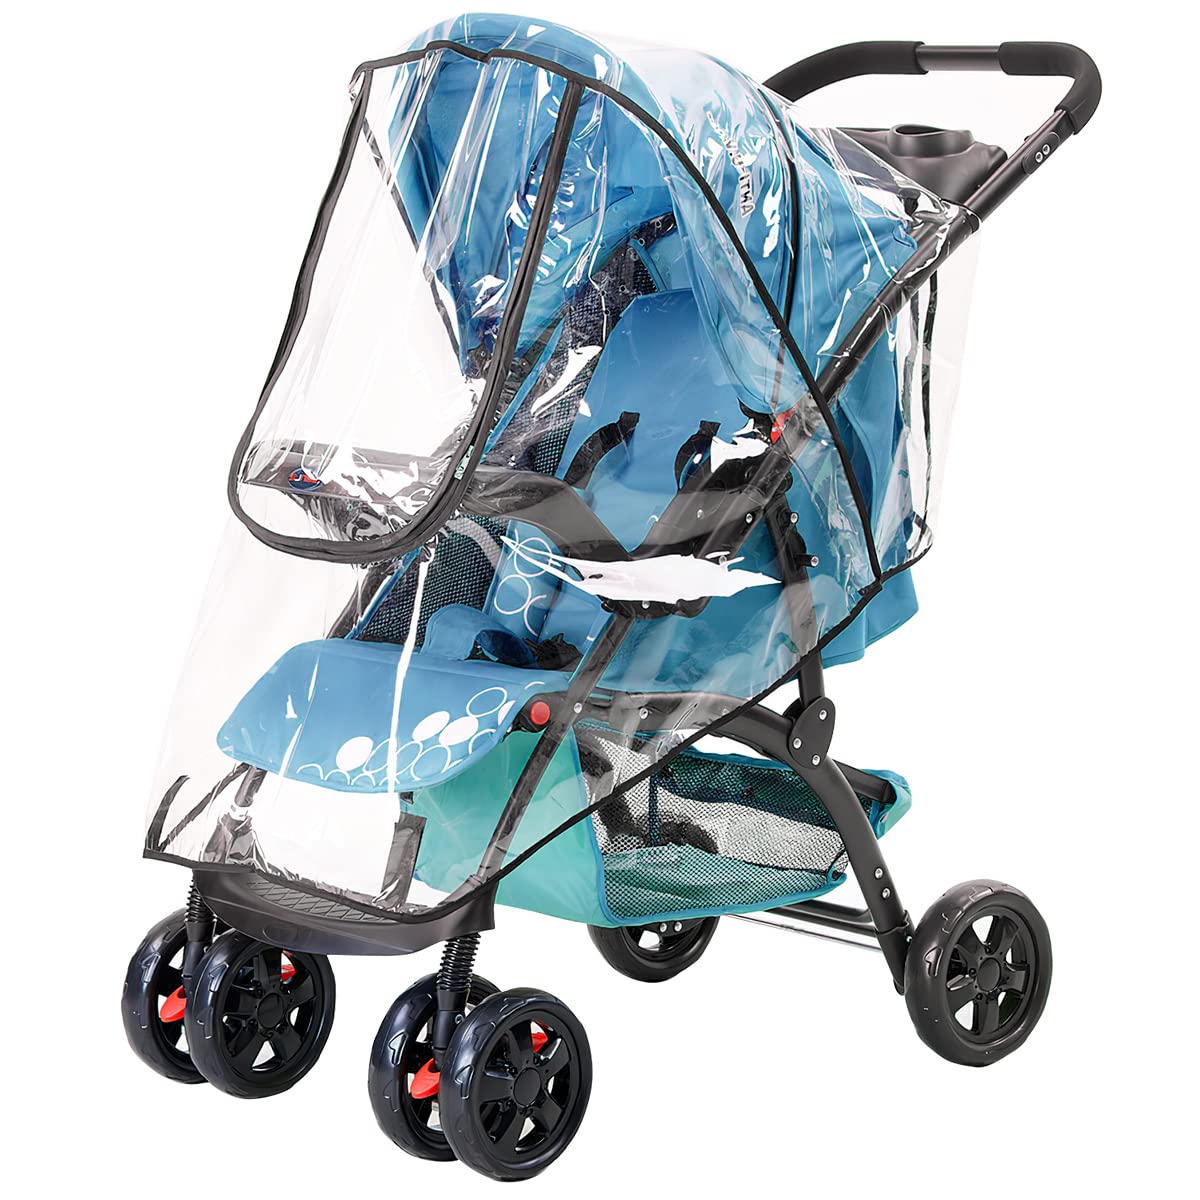 Universal Rain Cover for Pram Stroller Pushchair with Door NOCHME Against Rain Snow Anti Wind Sleet Dust Durable Transparent Stroller Protection Shield, Raincover Fit Most Car Seat Carrycot Prams